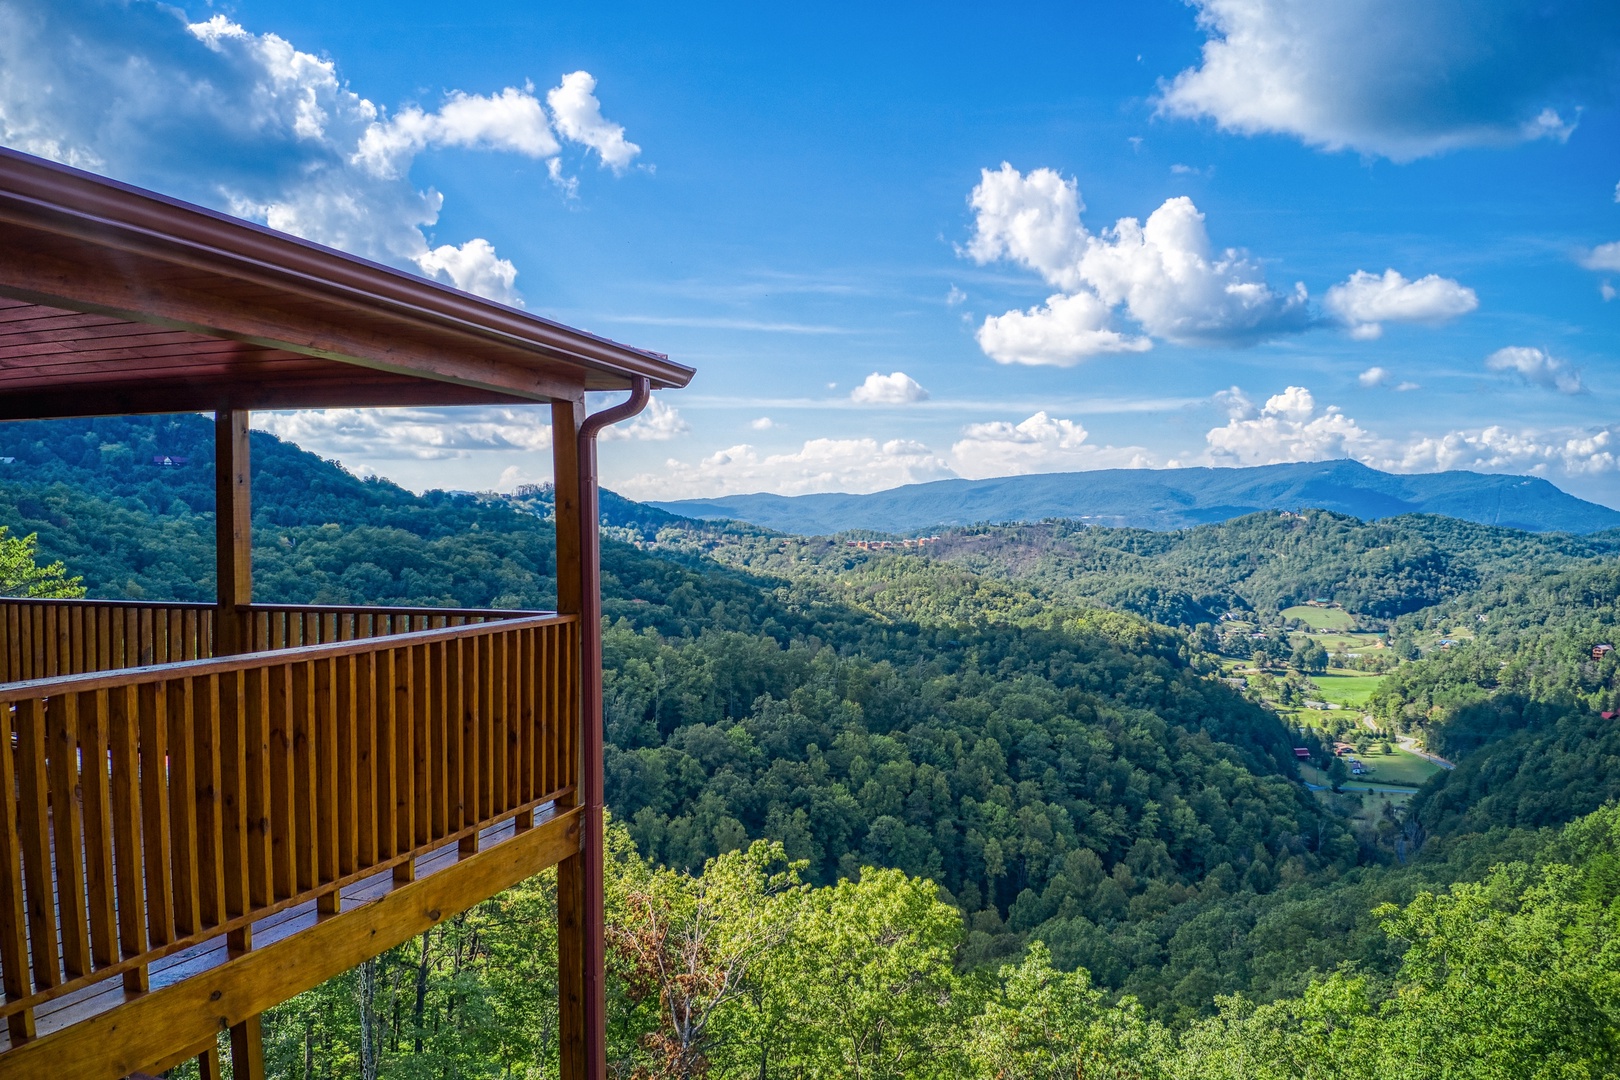 Mountain views at Four Seasons Palace, a 5-bedroom cabin rental located in Pigeon Forge